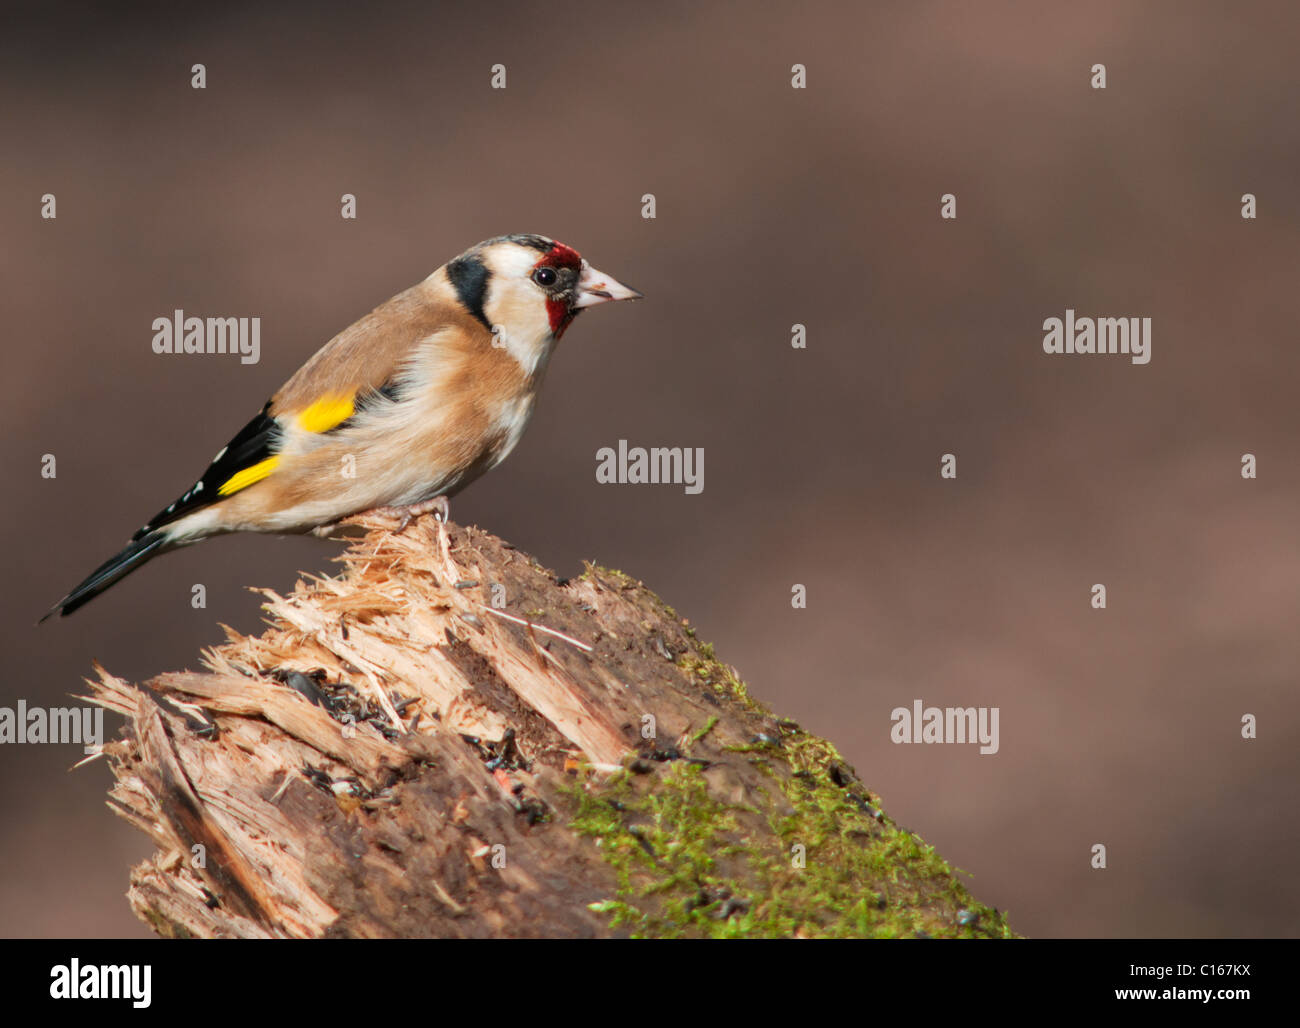 Goldfinch (Carduelis carduelis) perched on top of log Stock Photo